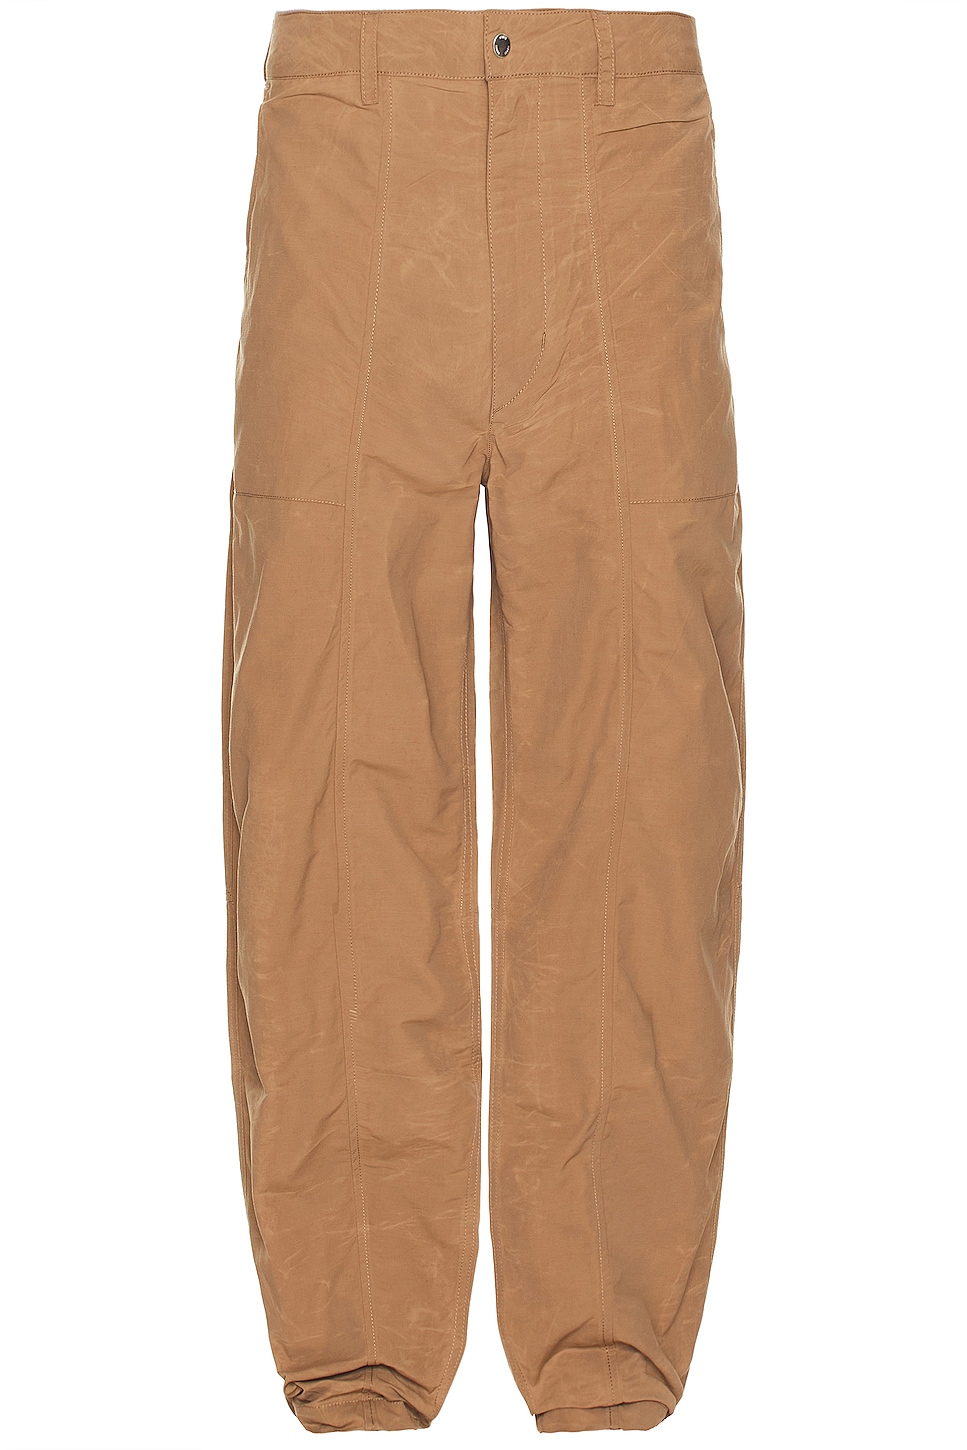 Image 1 of Norse Projects Sigur Relaxed Waxed Nylon Fatigue Trouser in Camel